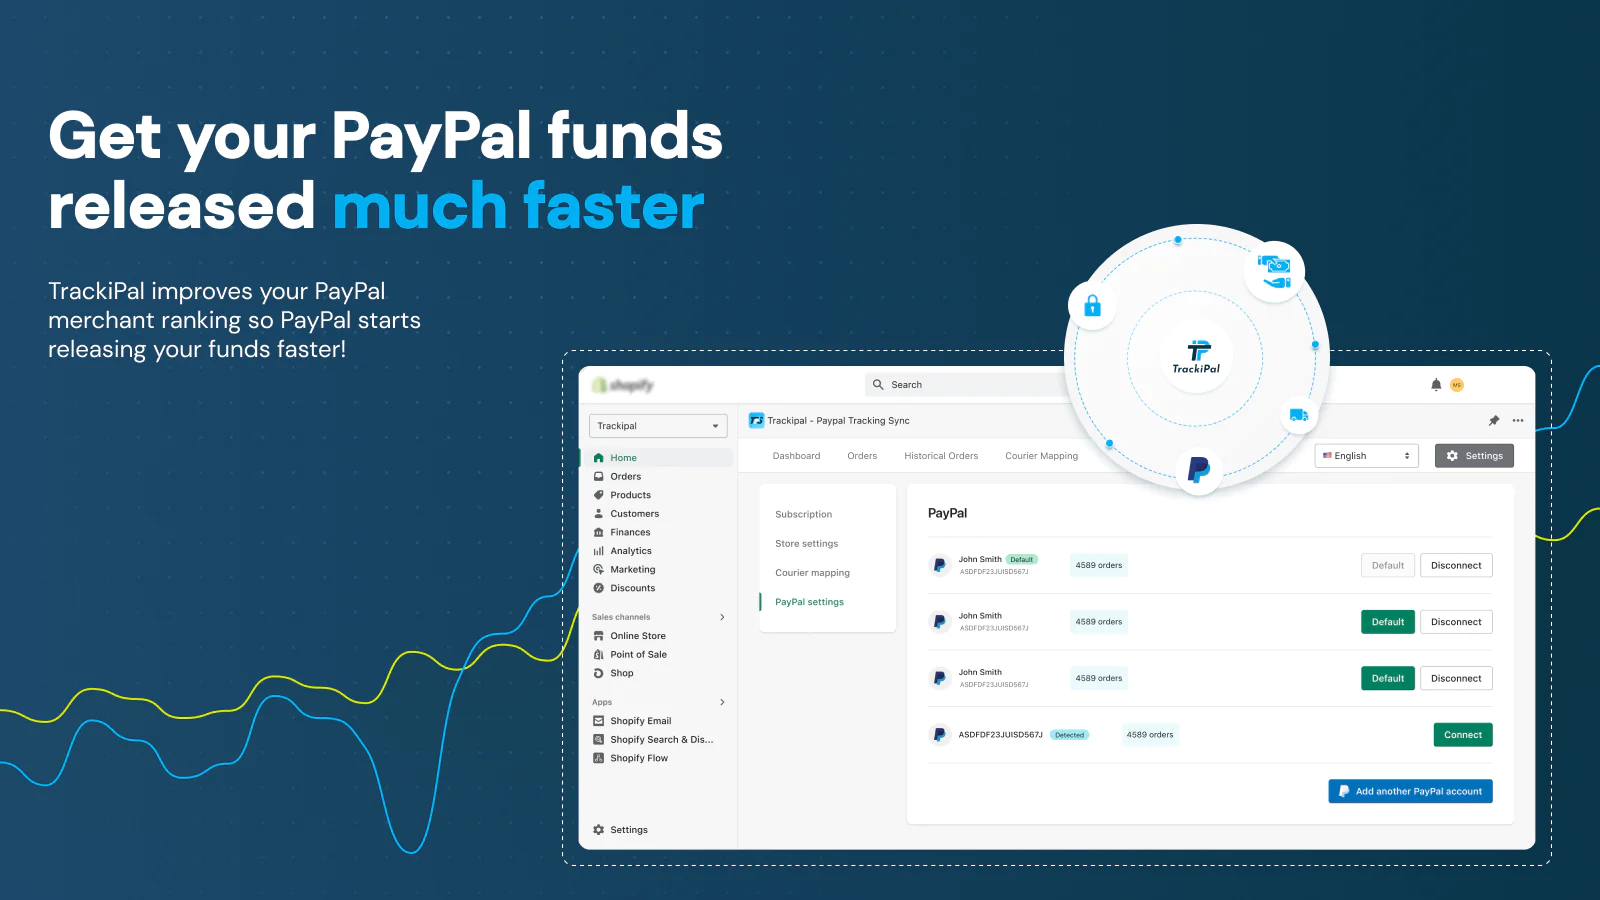 trackipal-paypal-tracking-sync-app-faster